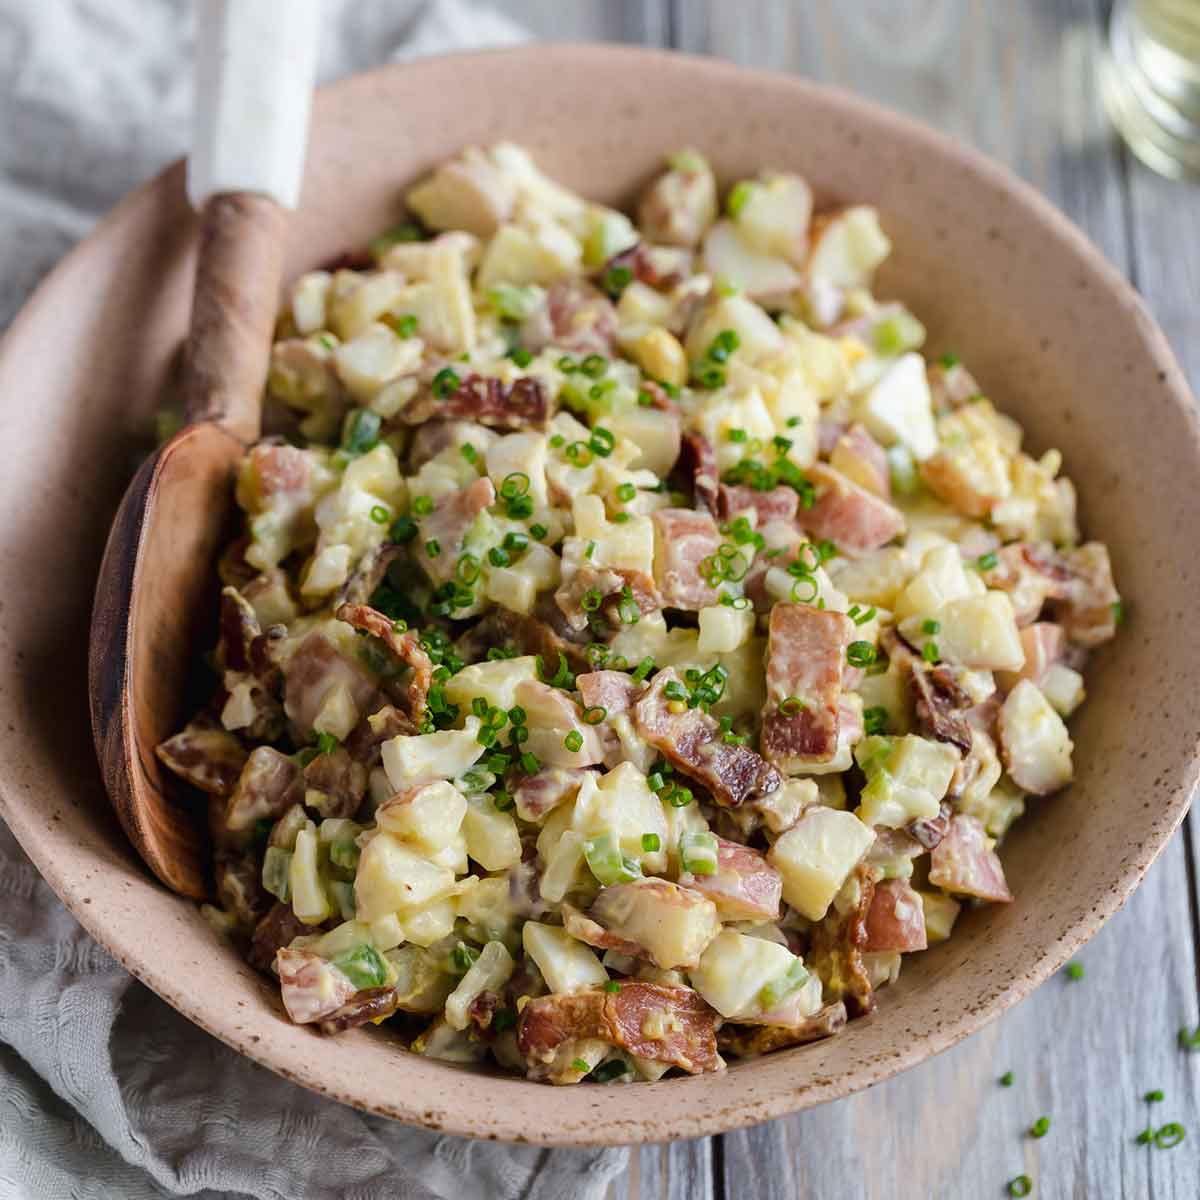 Potato salad with bacon and hard boiled eggs in a bowl with a serving spoon.